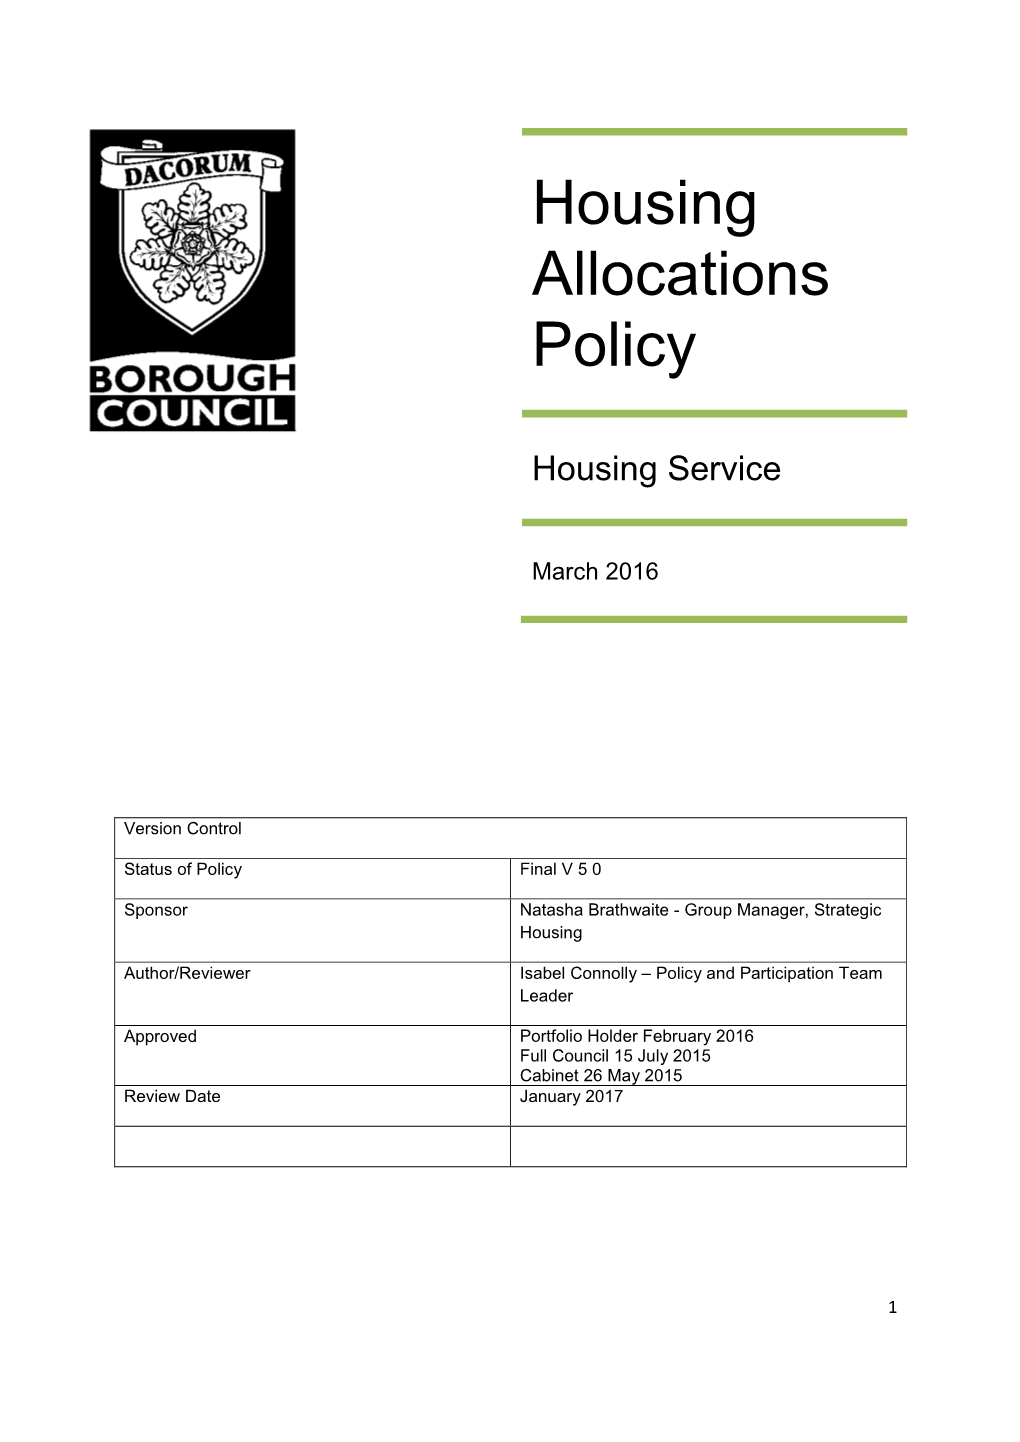 Housing Allocations Policy